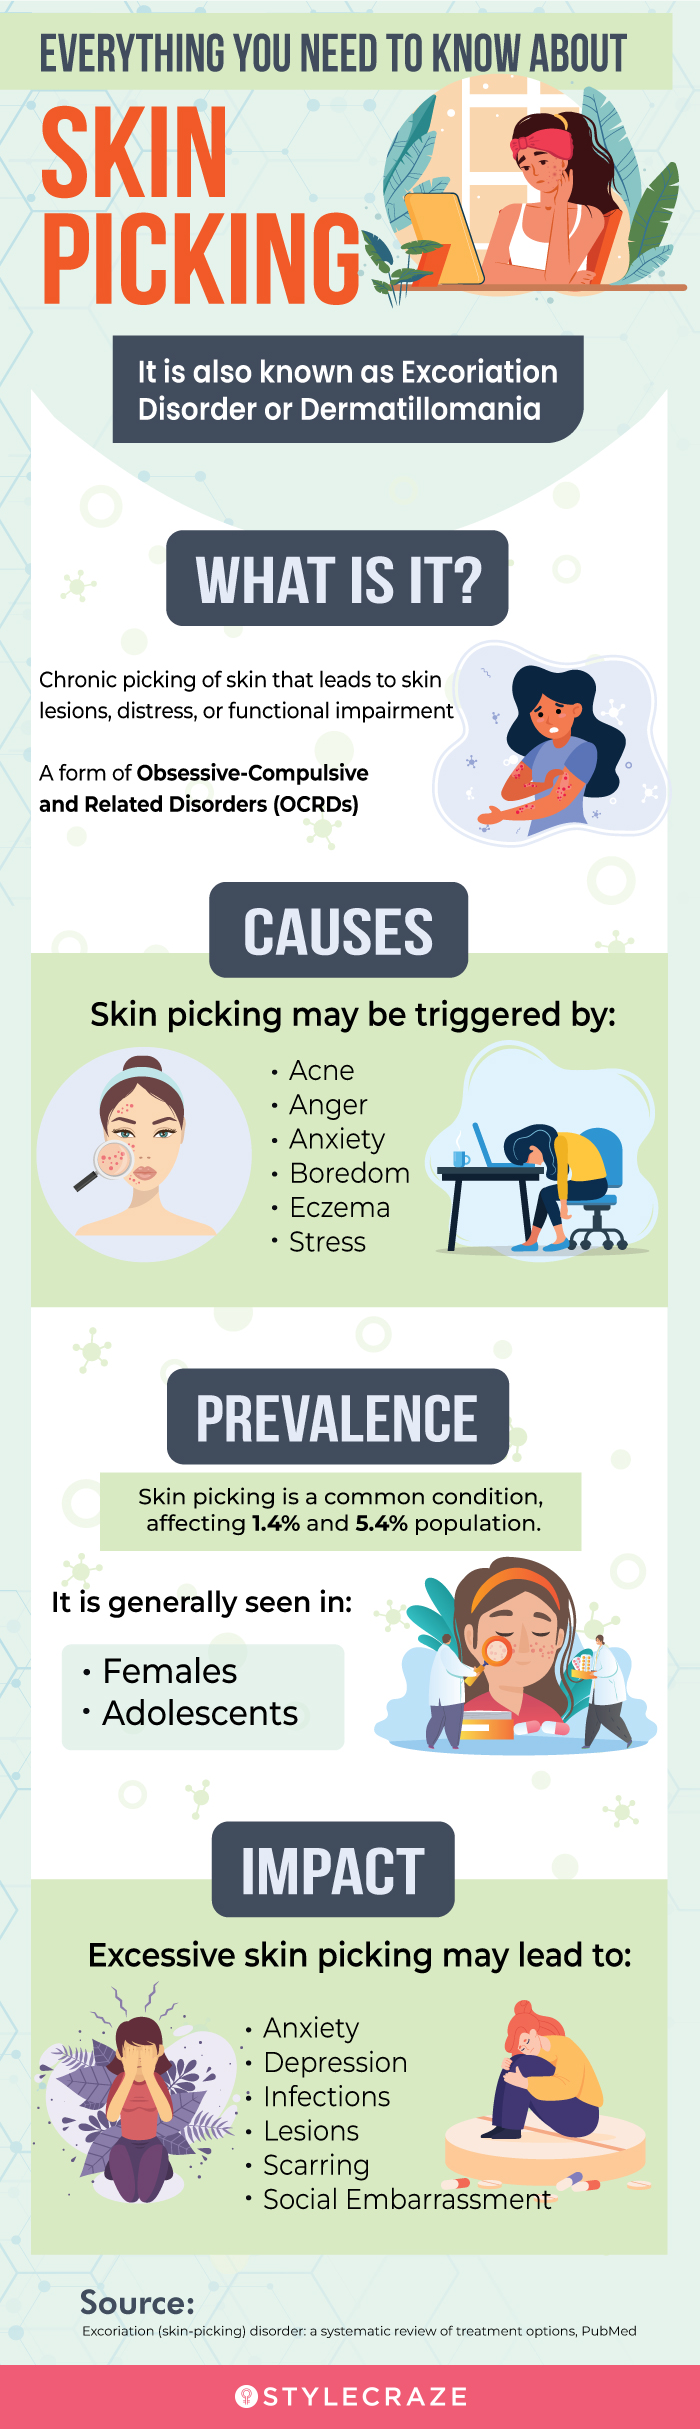 everything you need to know about skin picking (infographic)